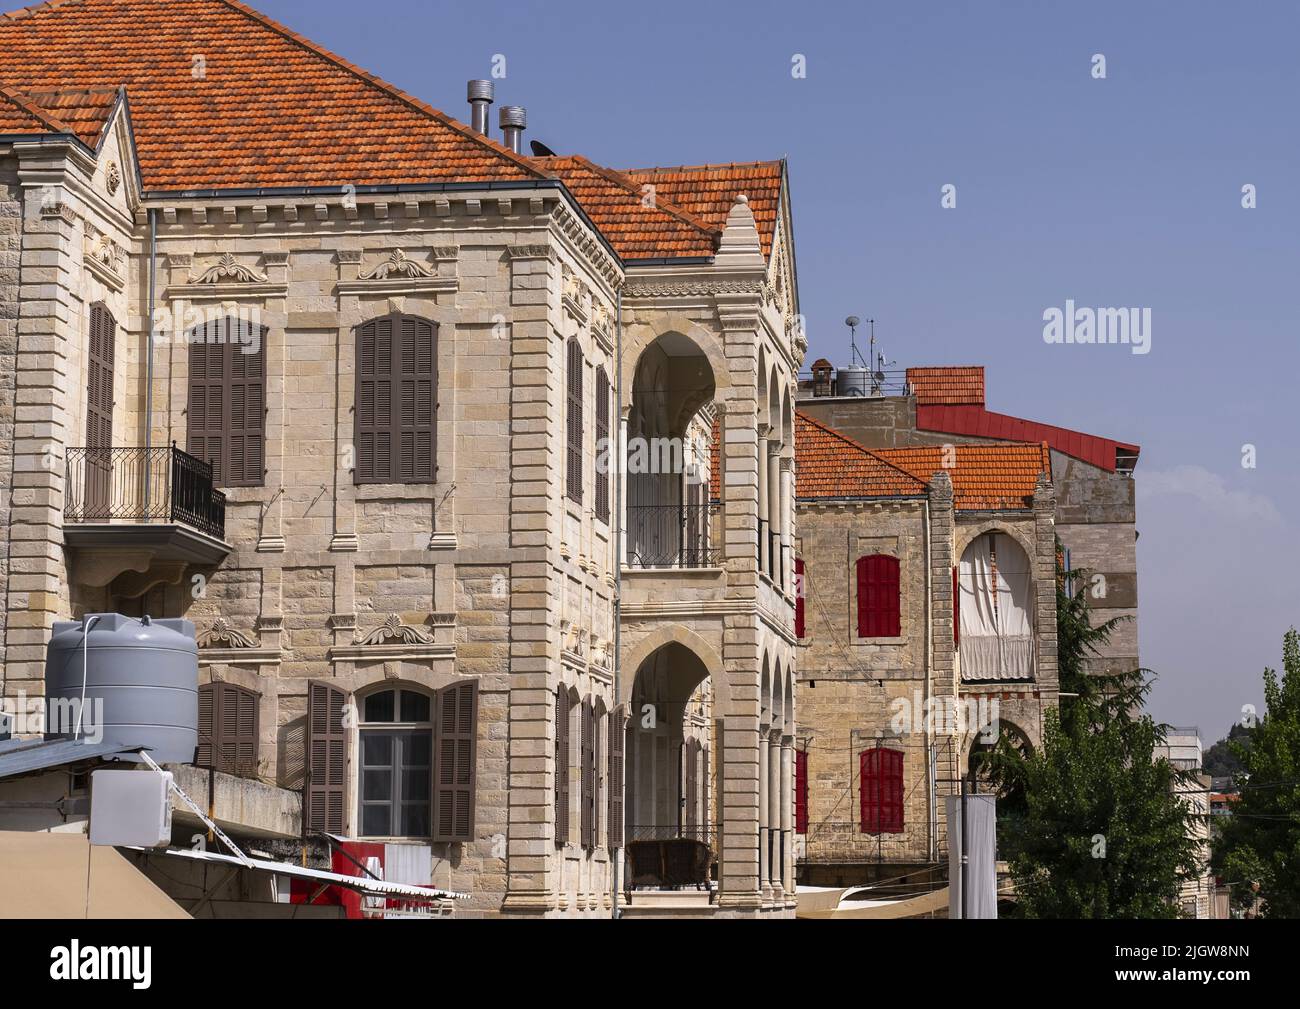 Old traditional lebanese houses with triple arches, Beqaa Governorate, Zahle, Lebanon Stock Photo